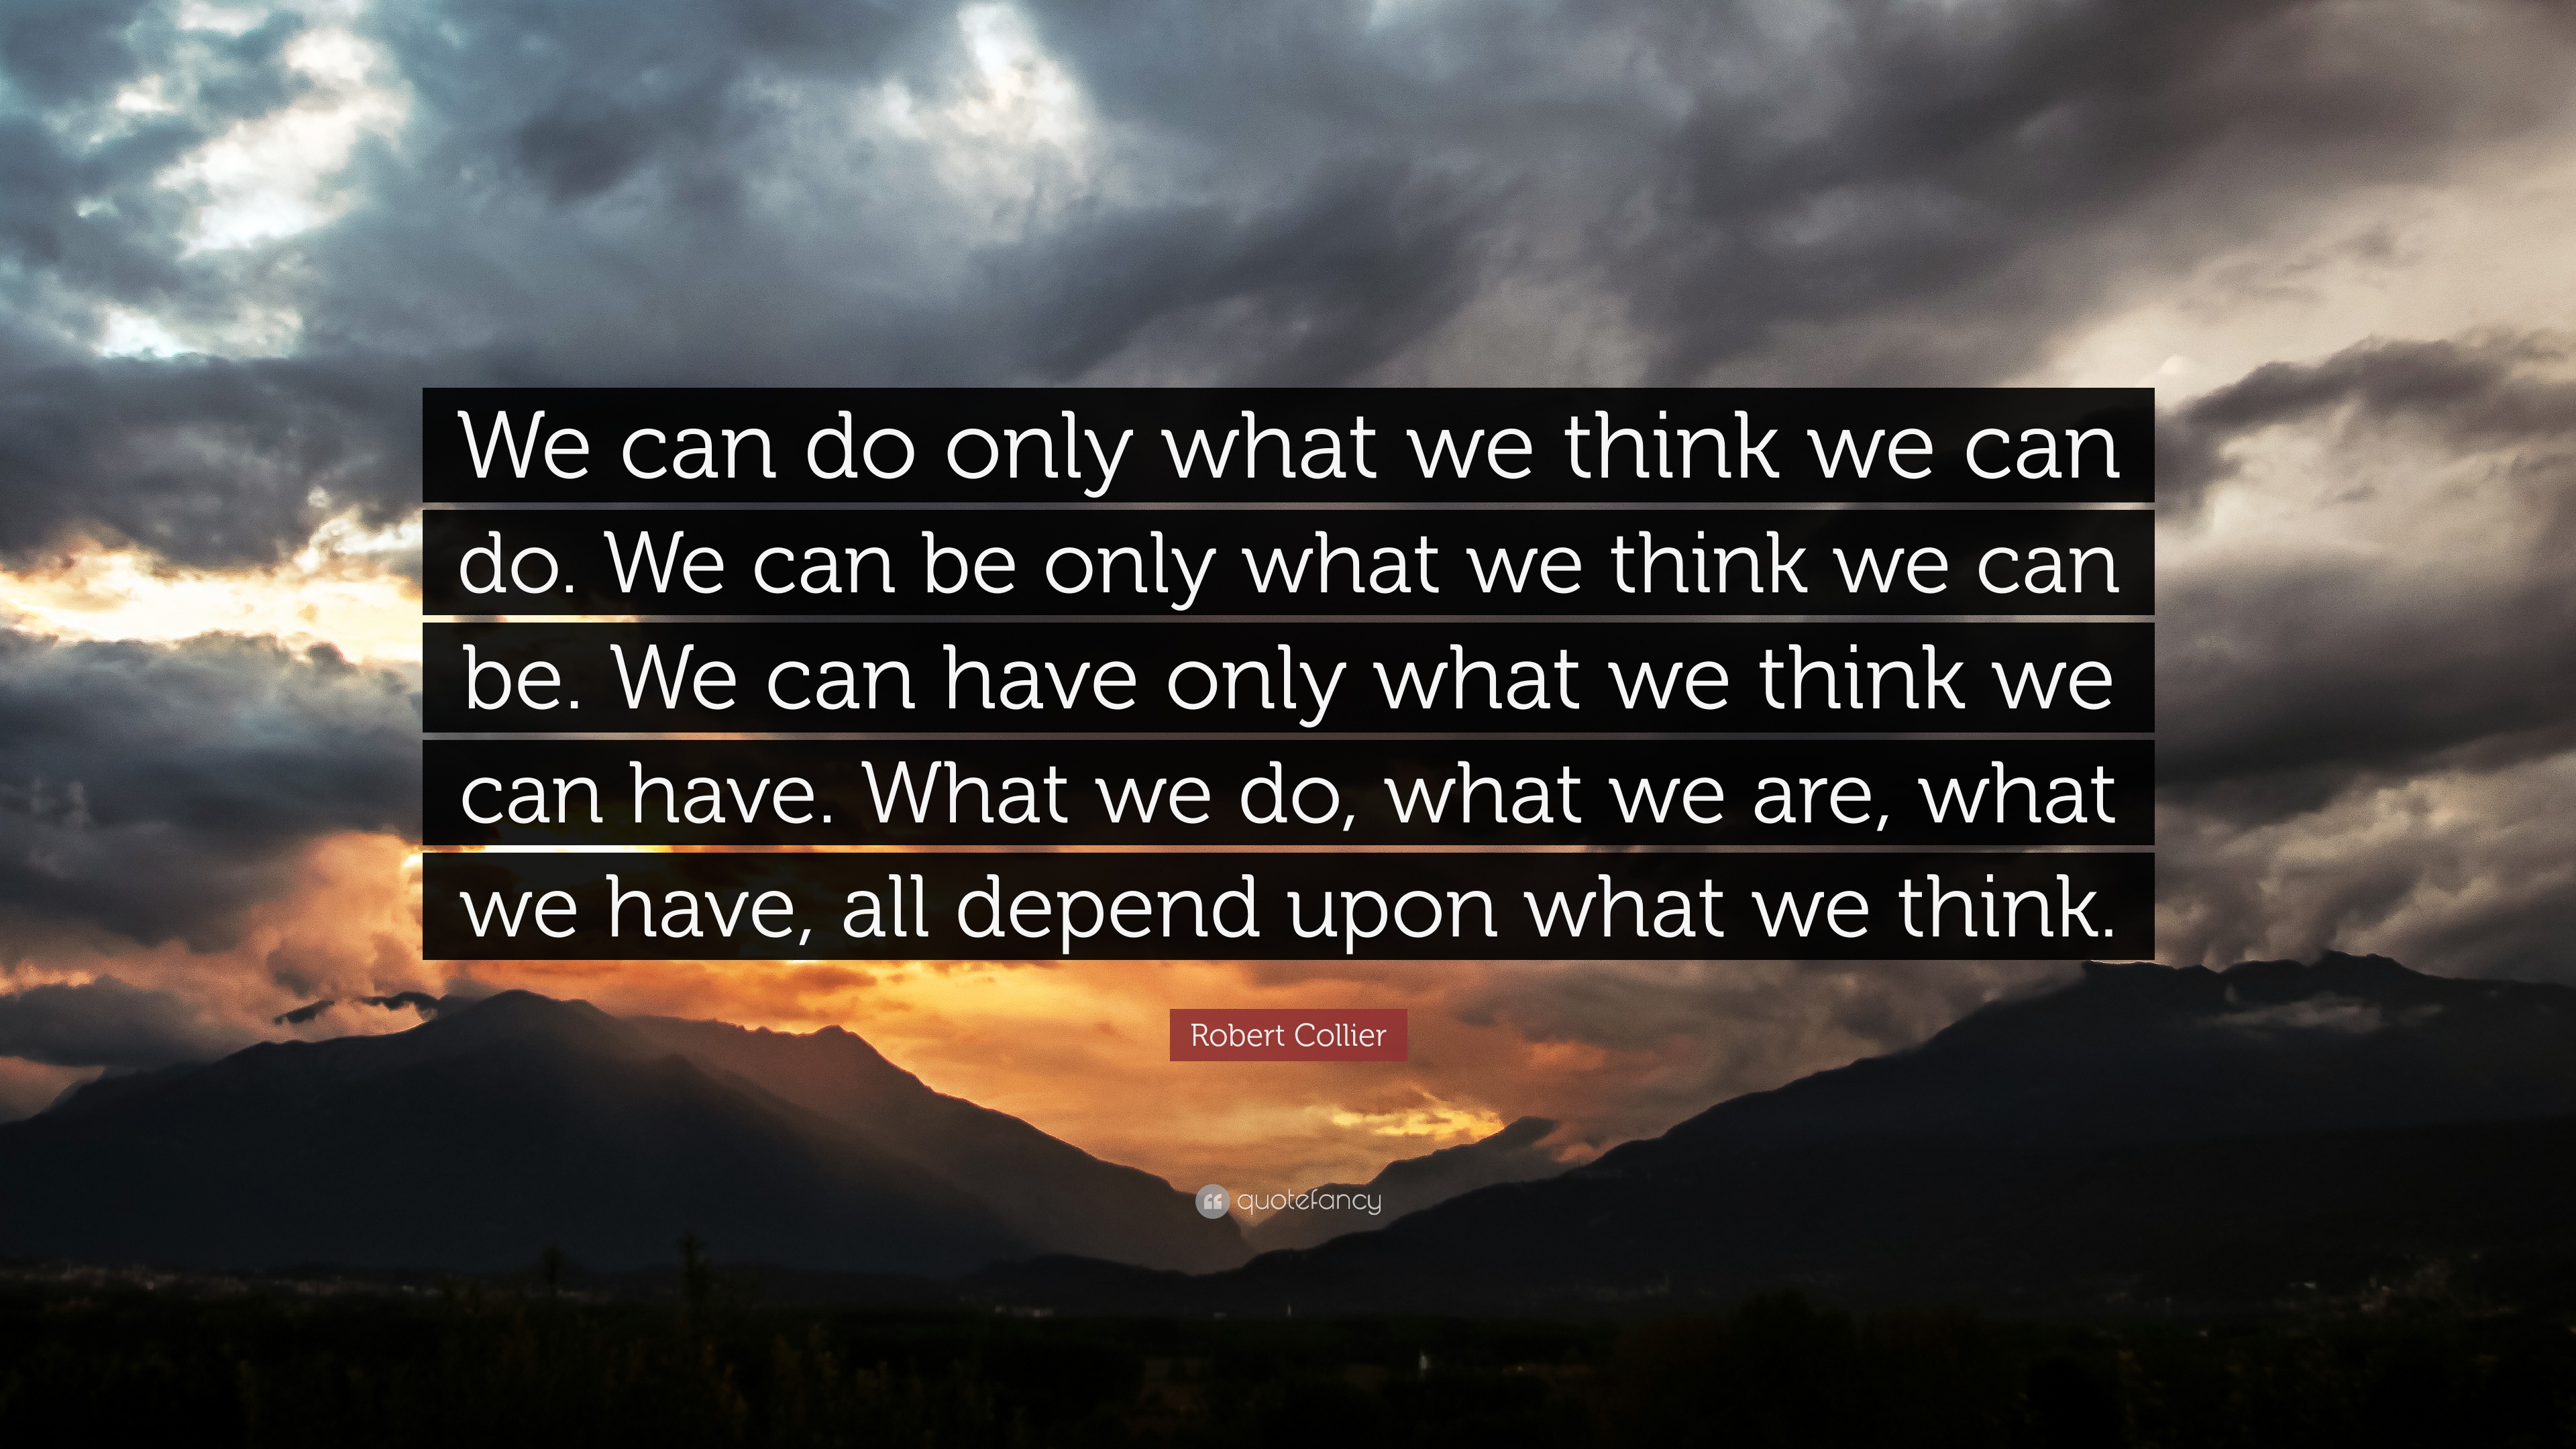 https://quotefancy.com/media/wallpaper/3840x2160/2441798-Robert-Collier-Quote-We-can-do-only-what-we-think-we-can-do-We-can.jpg